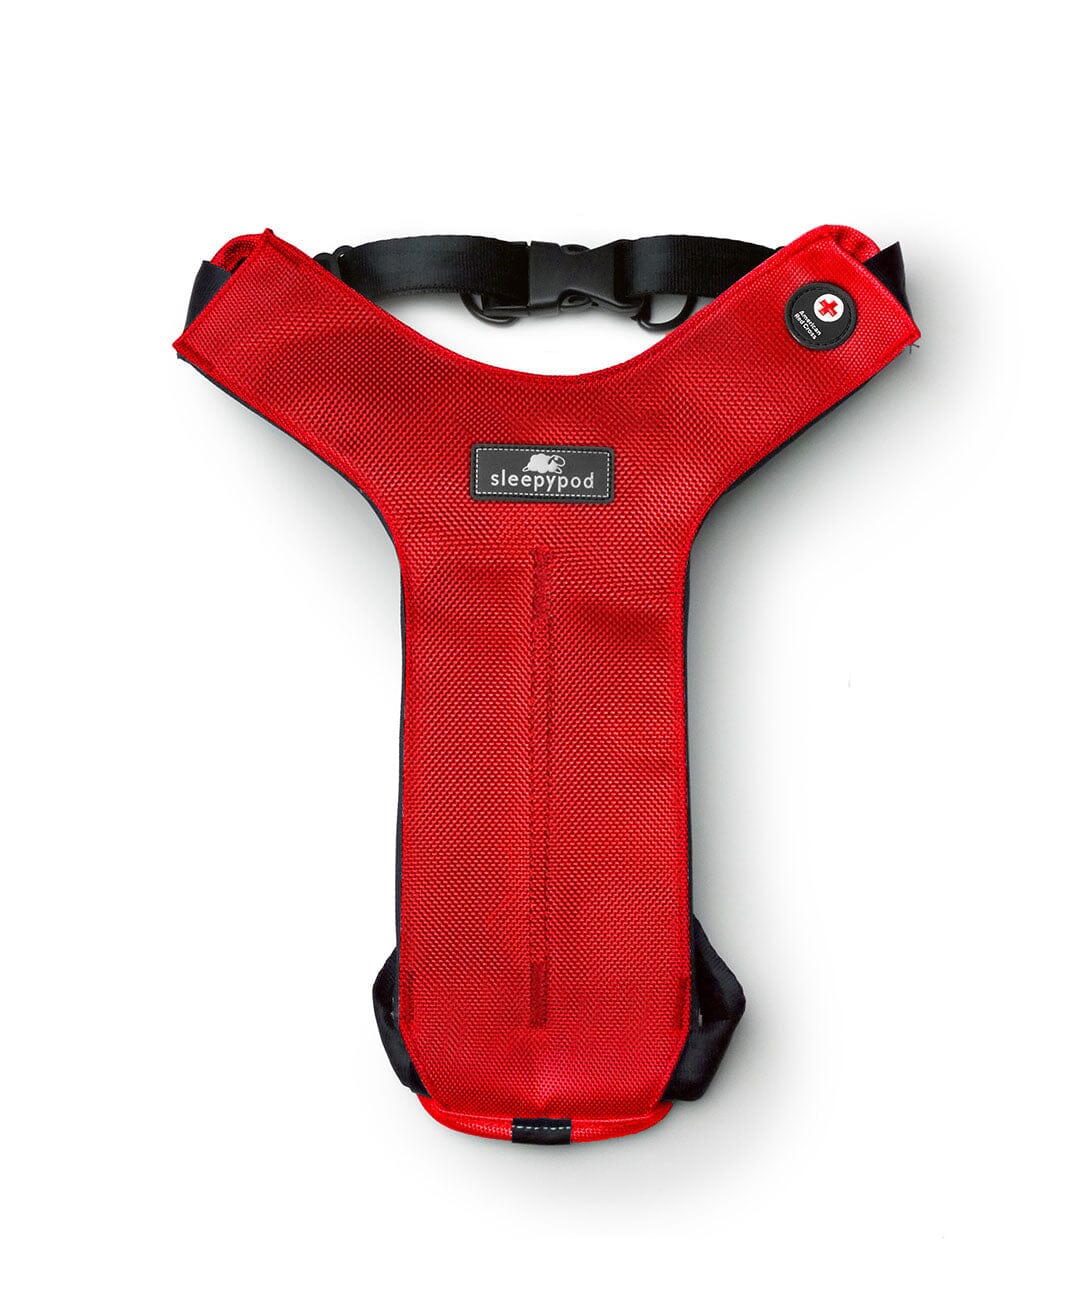 Special Edition - Sleepypod x American Red Cross Clickit Sport Plus Car Safety Dog Harness Harness Sleepypod Red S 